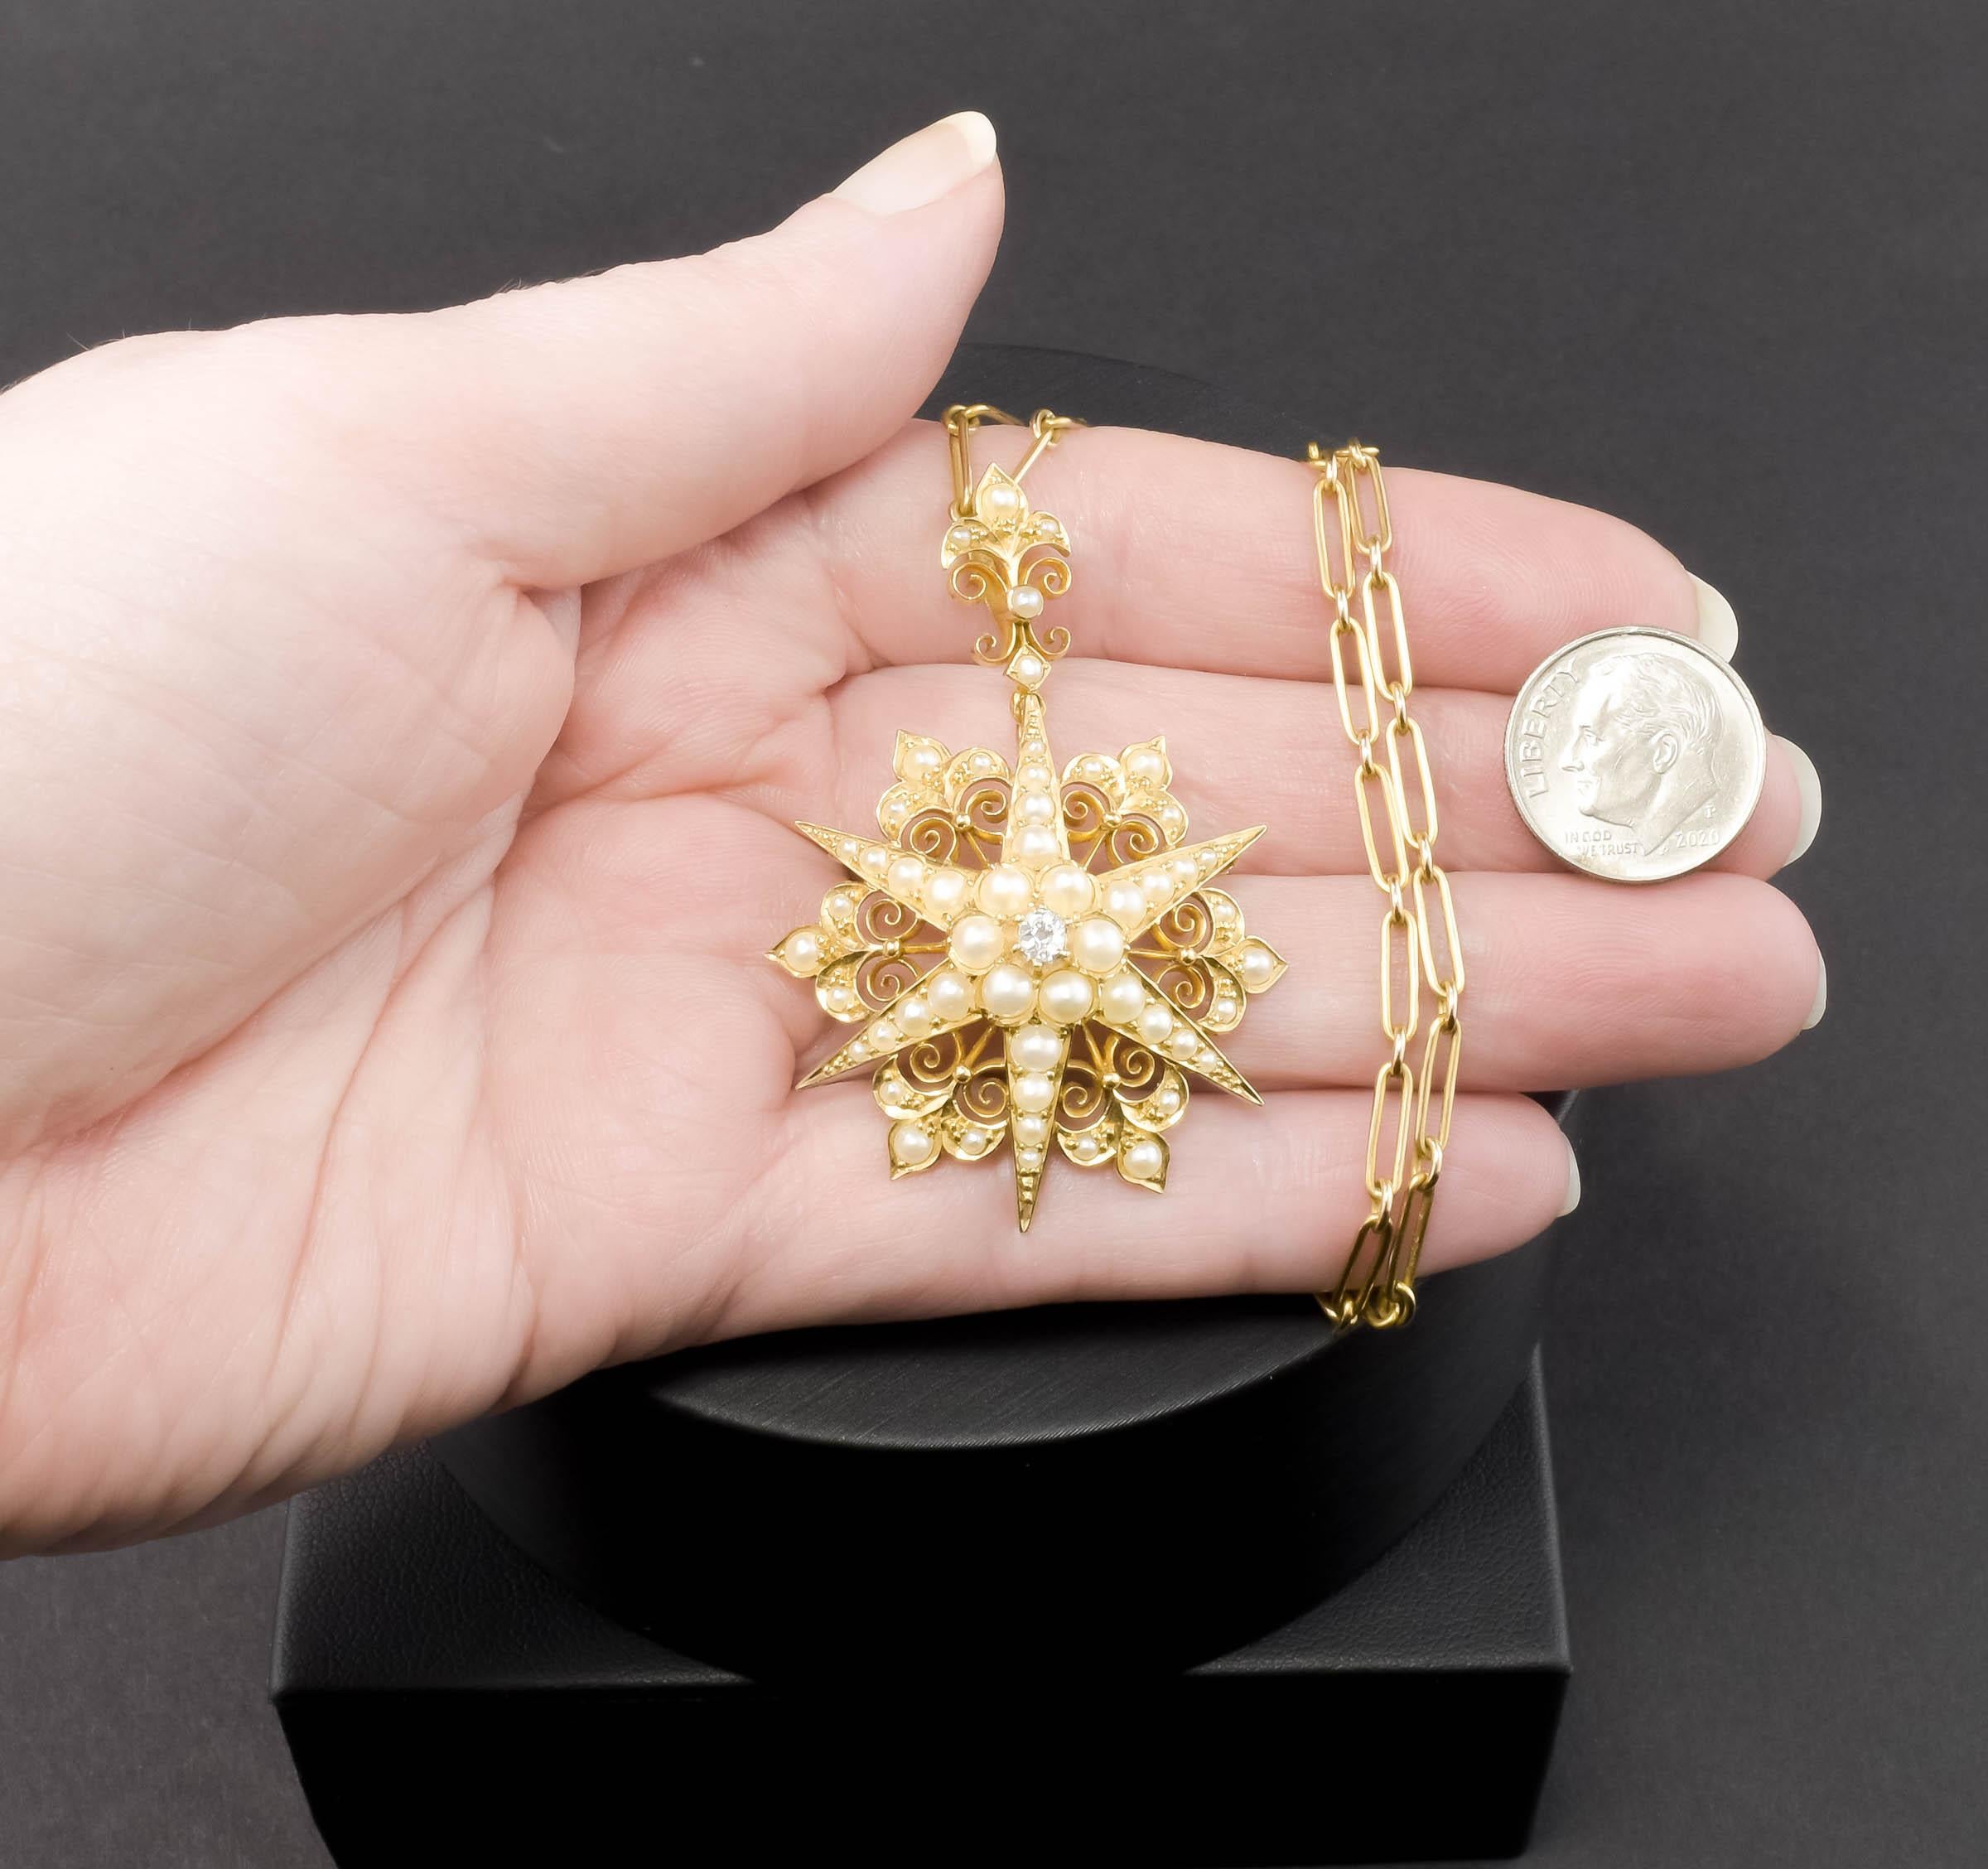 Offered is a beautifully detailed antique gold Celestial themed Pendant - Brooch - Necklace set in a period fitted box.  I believe it dates to the Victorian period, though there is an added (later) inscription from 1906.

Finely made of 18K yellow